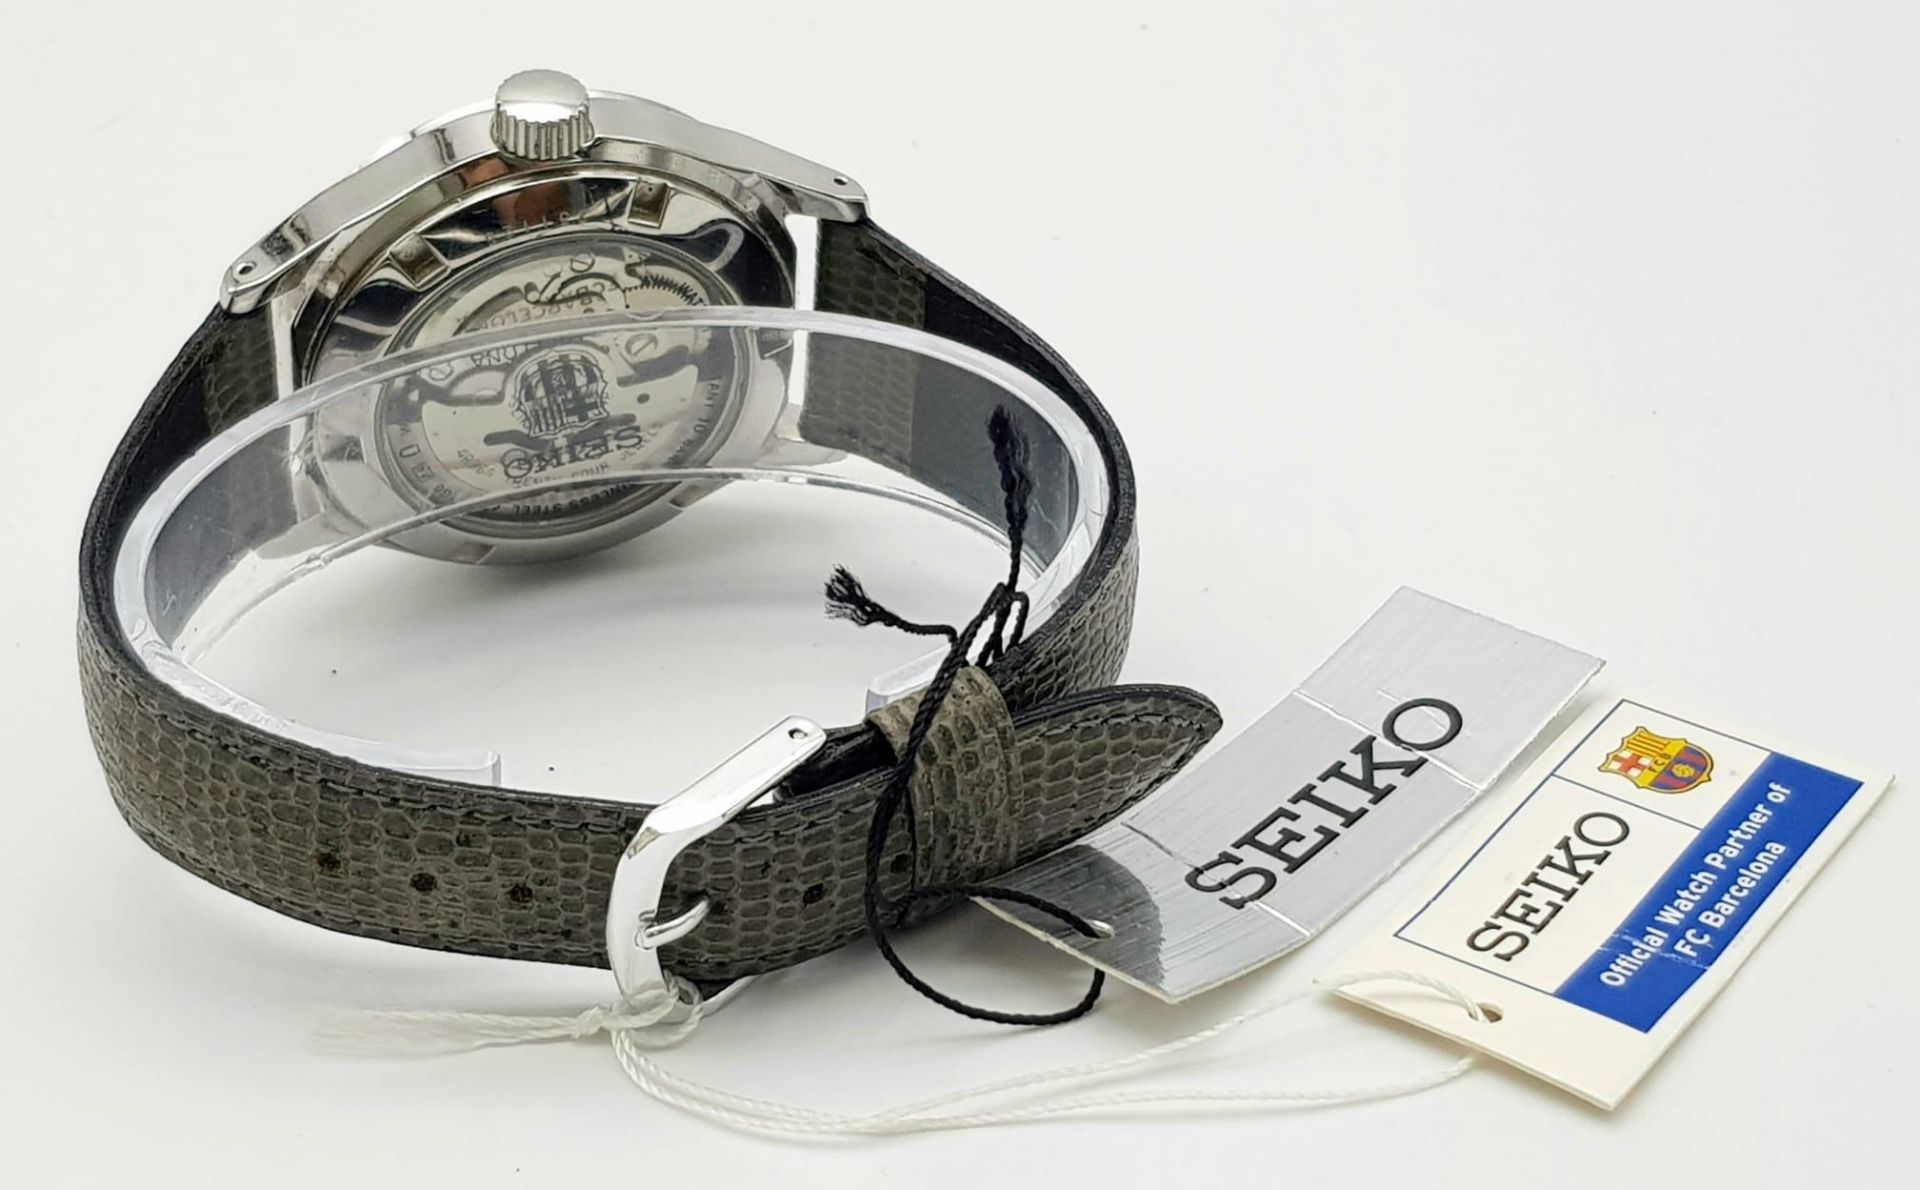 A SEIKO "BARCELONA F.C."AUTOMATIC GENTS WATCH WITH SKELETON BACK , NEVER WORN AS NEW WITH TAGS STILL - Bild 4 aus 7